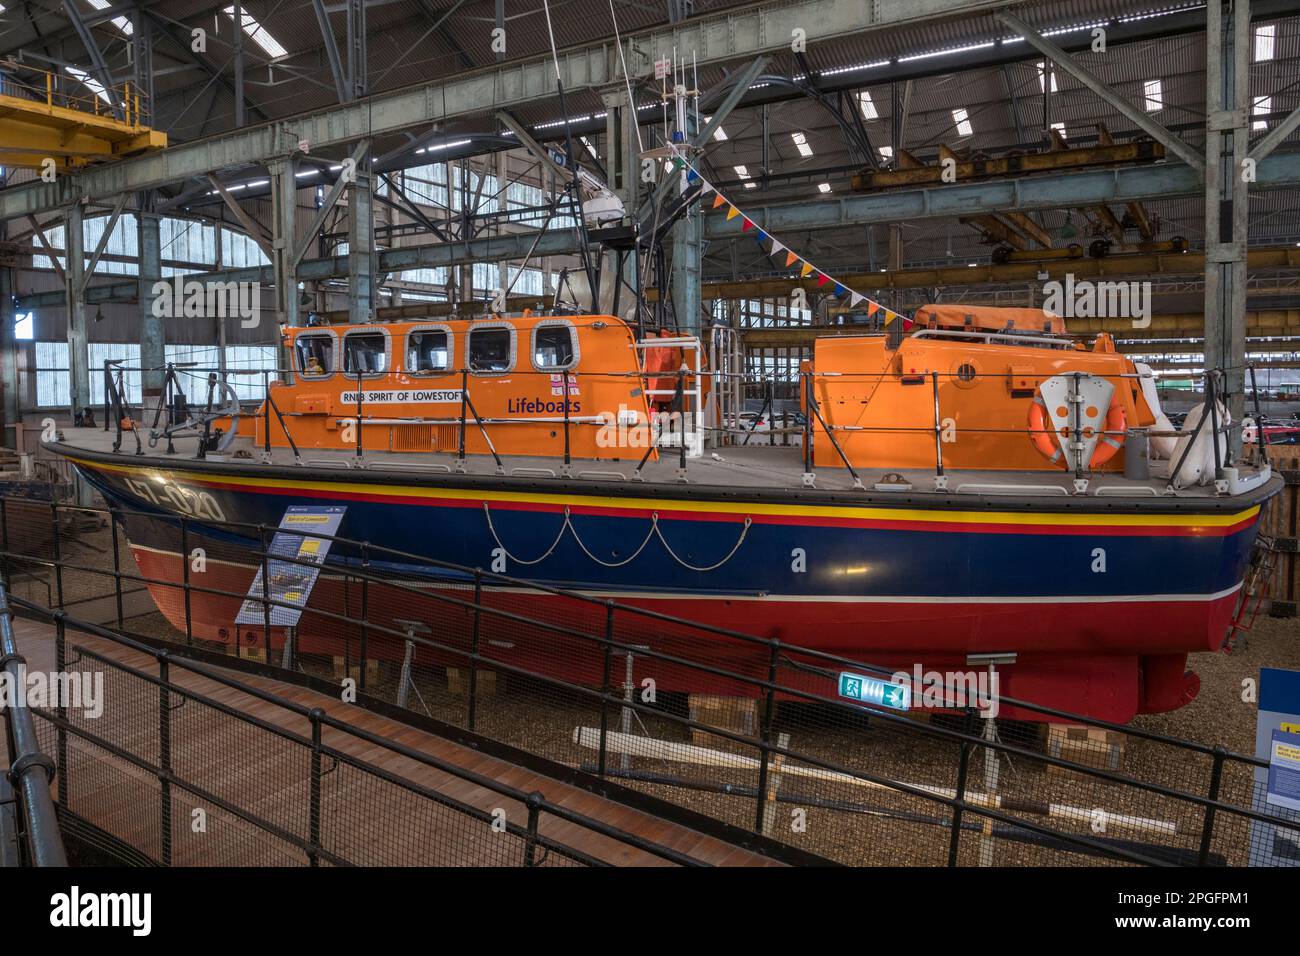 The RNLB Spirit of Lowestoft (ON 1132) in the RNLI Historic Lifeboat Collection, Historic Dockyard Chatham, Kent, UK. Stock Photo